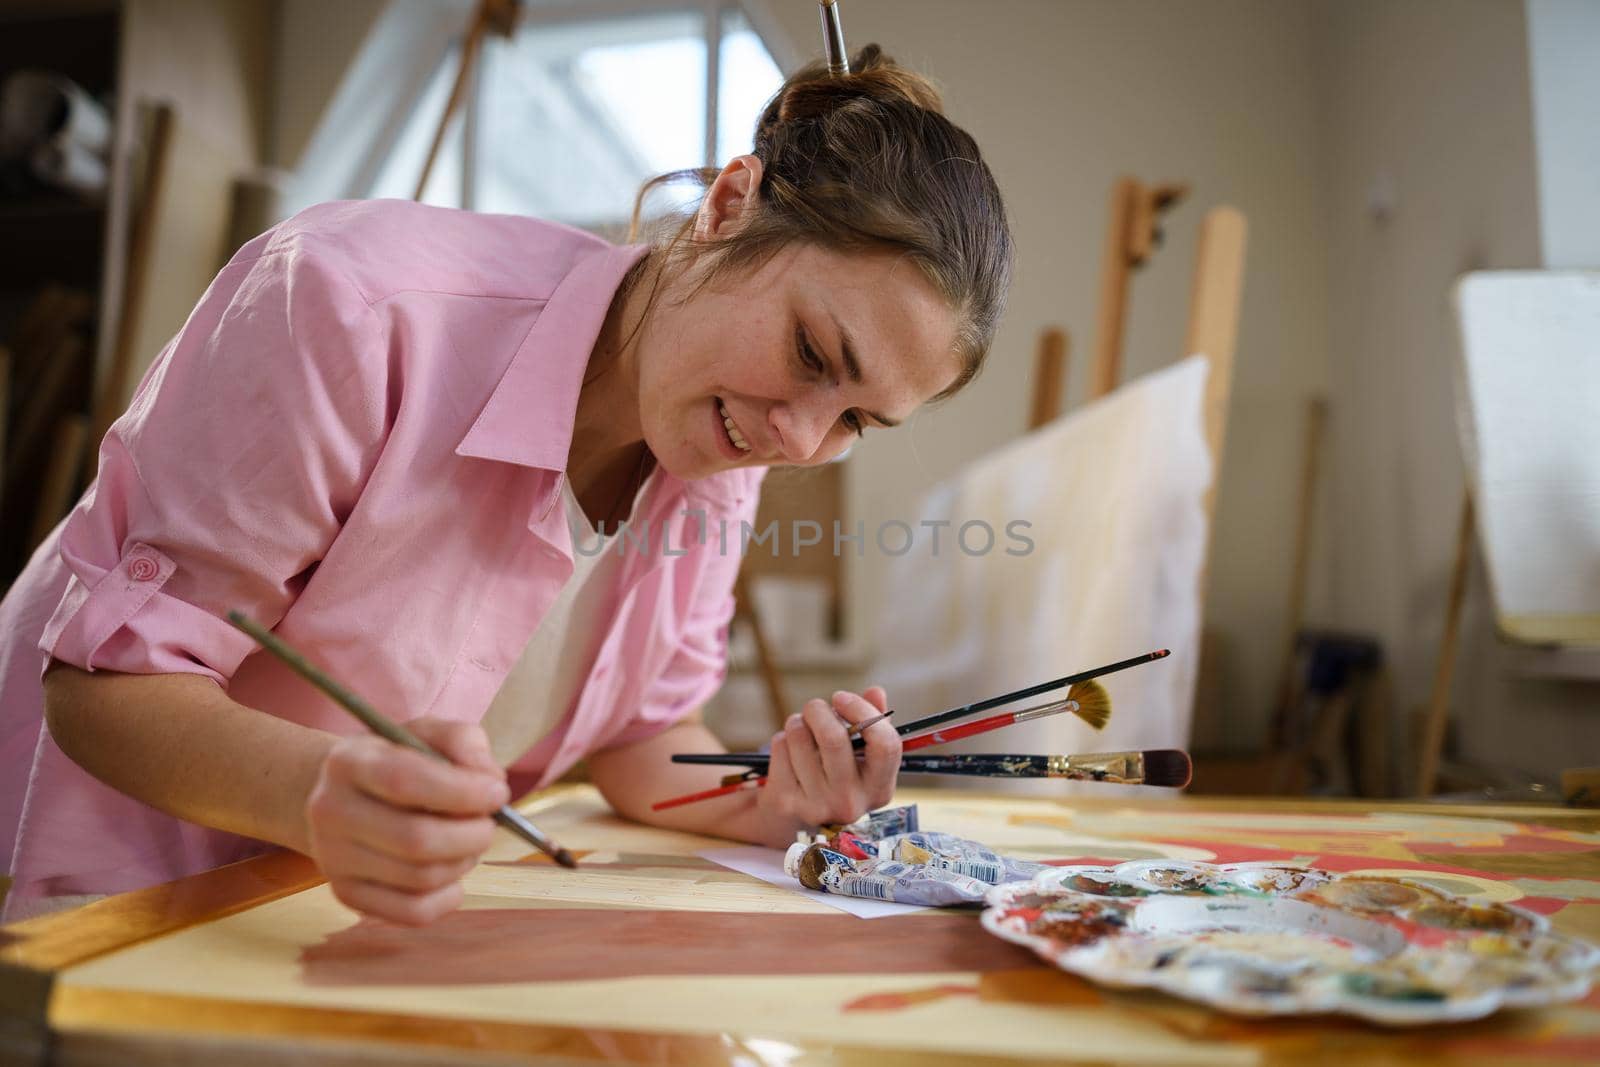 Caucasian woman artist working on a painting in bright daylight studio. Happy artist draws an art project with paints and a brush in the workshop. Hobby. Artist at work. Creative profession.